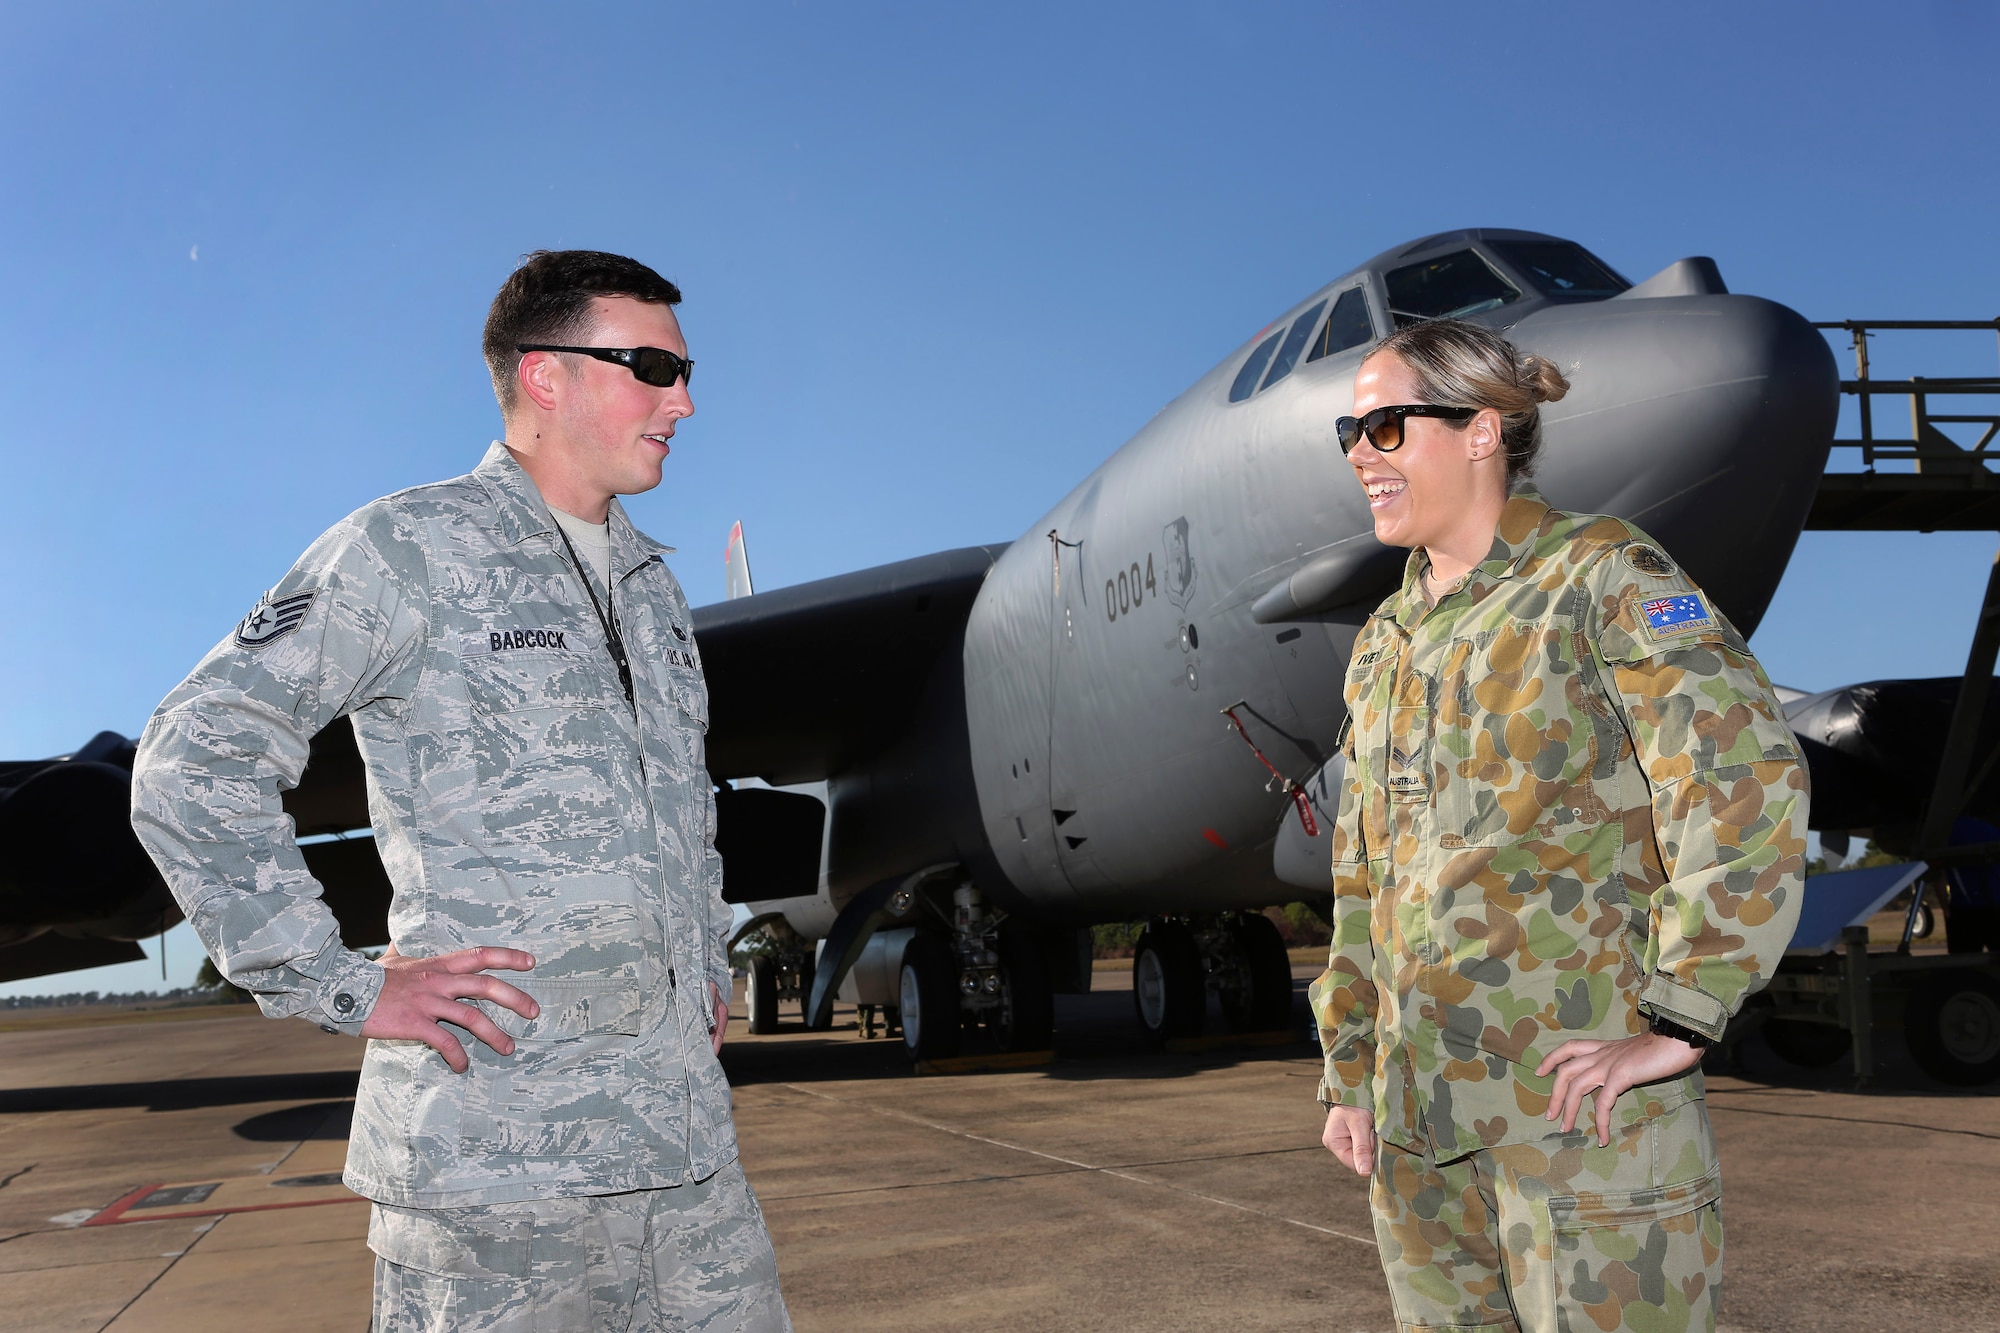 U.S. and Royal Australian Air Force members discuss capabilities of the U.S. Air Force B-52 Stratofortress bomber during a static display, June 20, 2016, Royal Australian Air Force Base Darwin, Australia. The U.S. aircraft and crew were in the region as part of U.S. Pacific Command’s Continuous Bomber Presence operations designed to demonstrate U.S. commitment to the Indo-Asia-Pacific Region and enhance regional security. (Royal Australian Air Force photo by Cpl. Craig Barrett/Released)